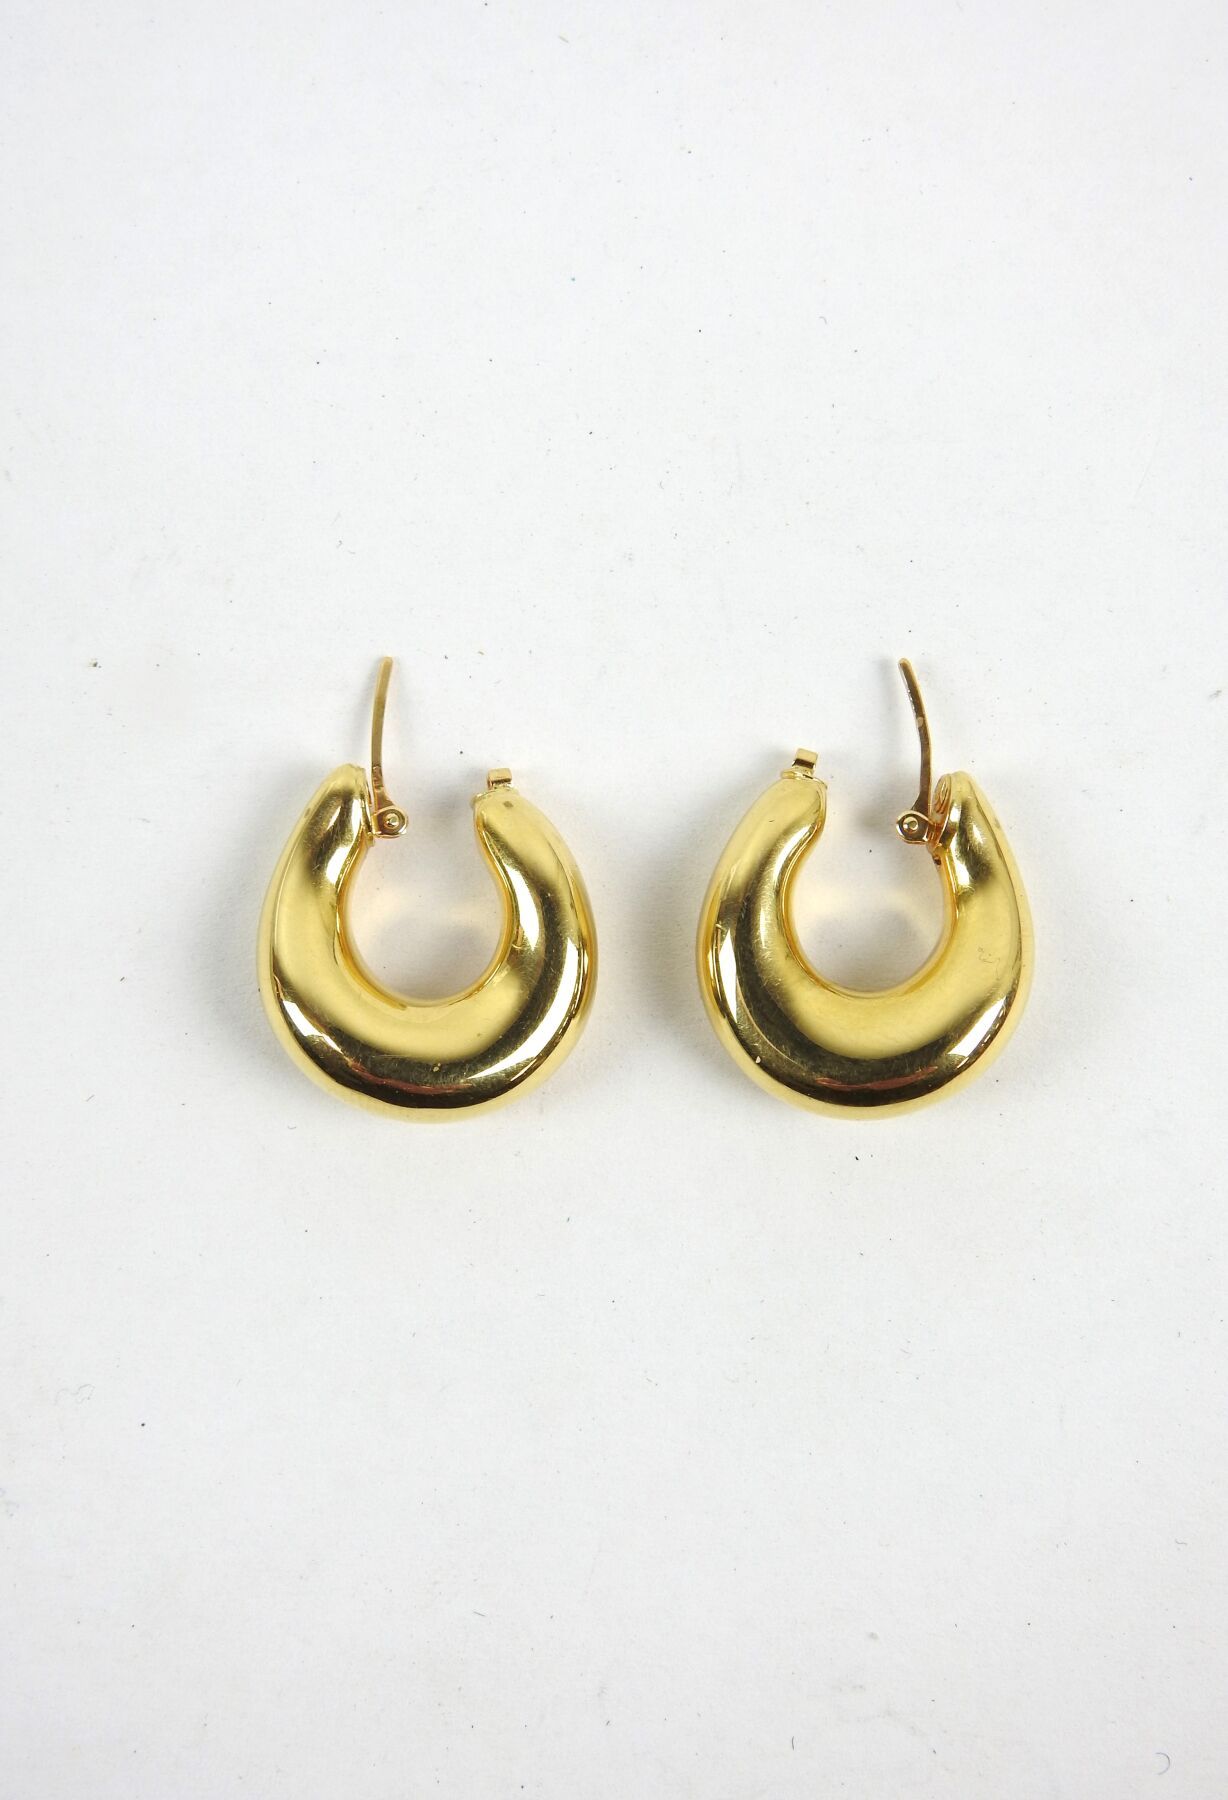 Null Pair of crescent-shaped EARRINGS in 750/1000th yellow gold. 3.18g